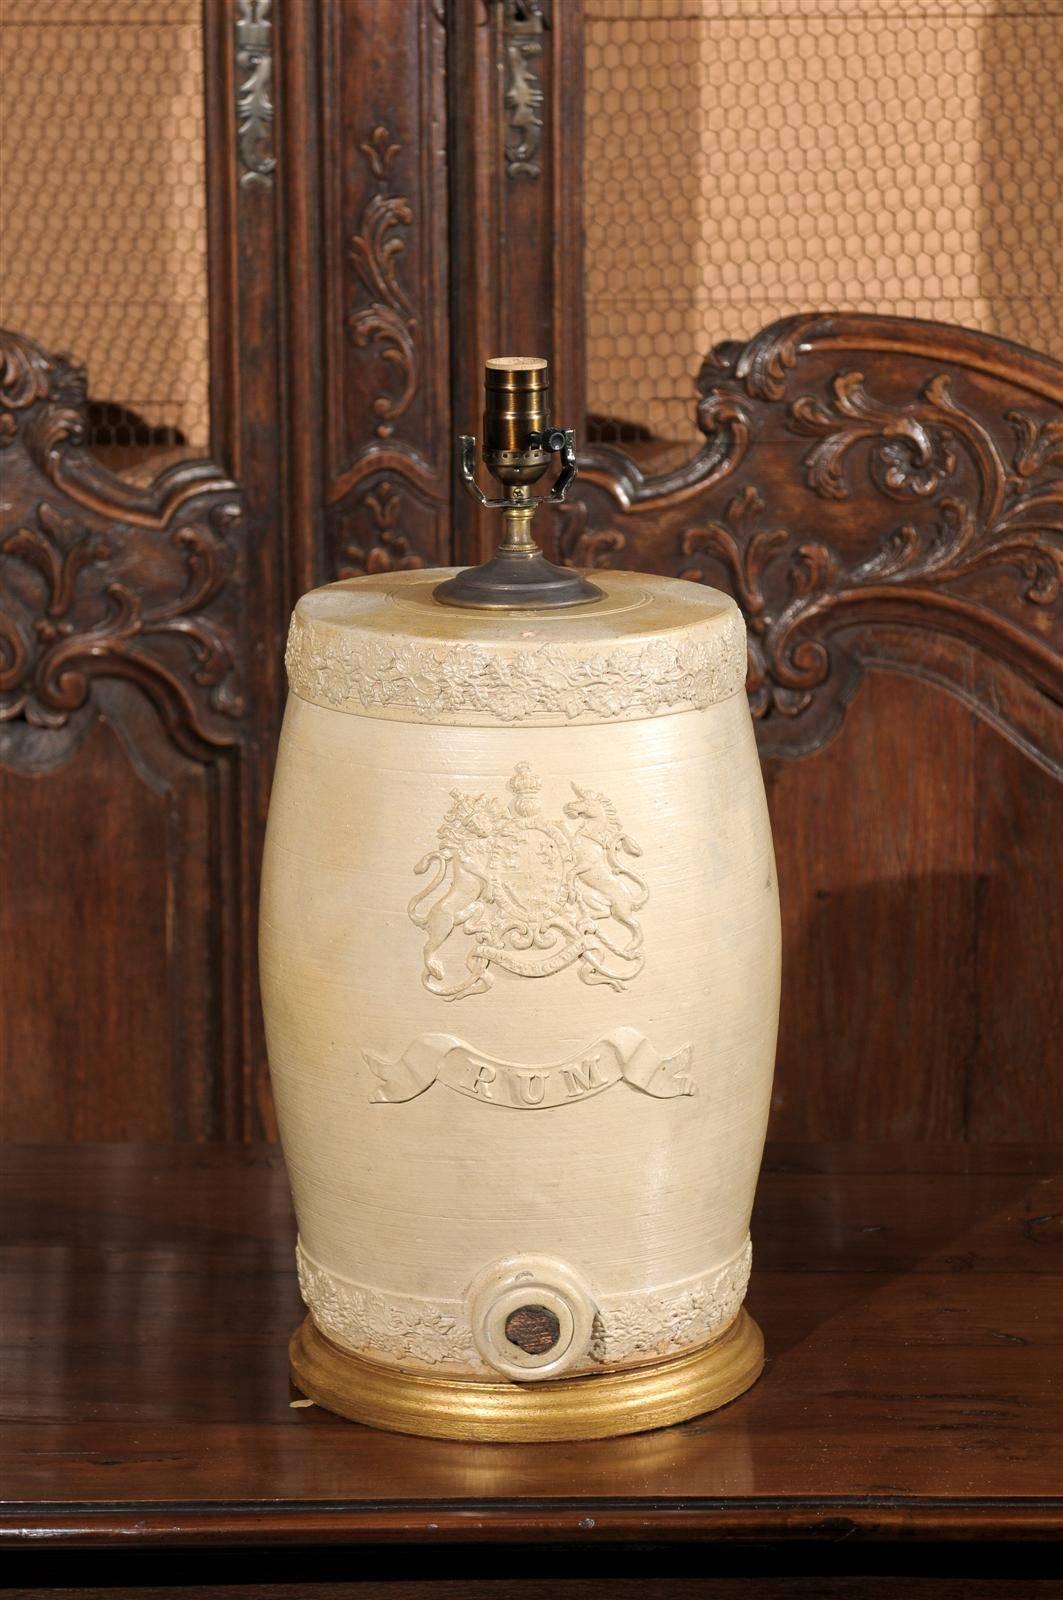 An English 19th century stoneware spirit barrel table lamp. This English stoneware spirit barrel from the mid-19th century has been converted into an exquisite table lamp. The glazed body is decorated with low-reliefs, depicting floral motifs and